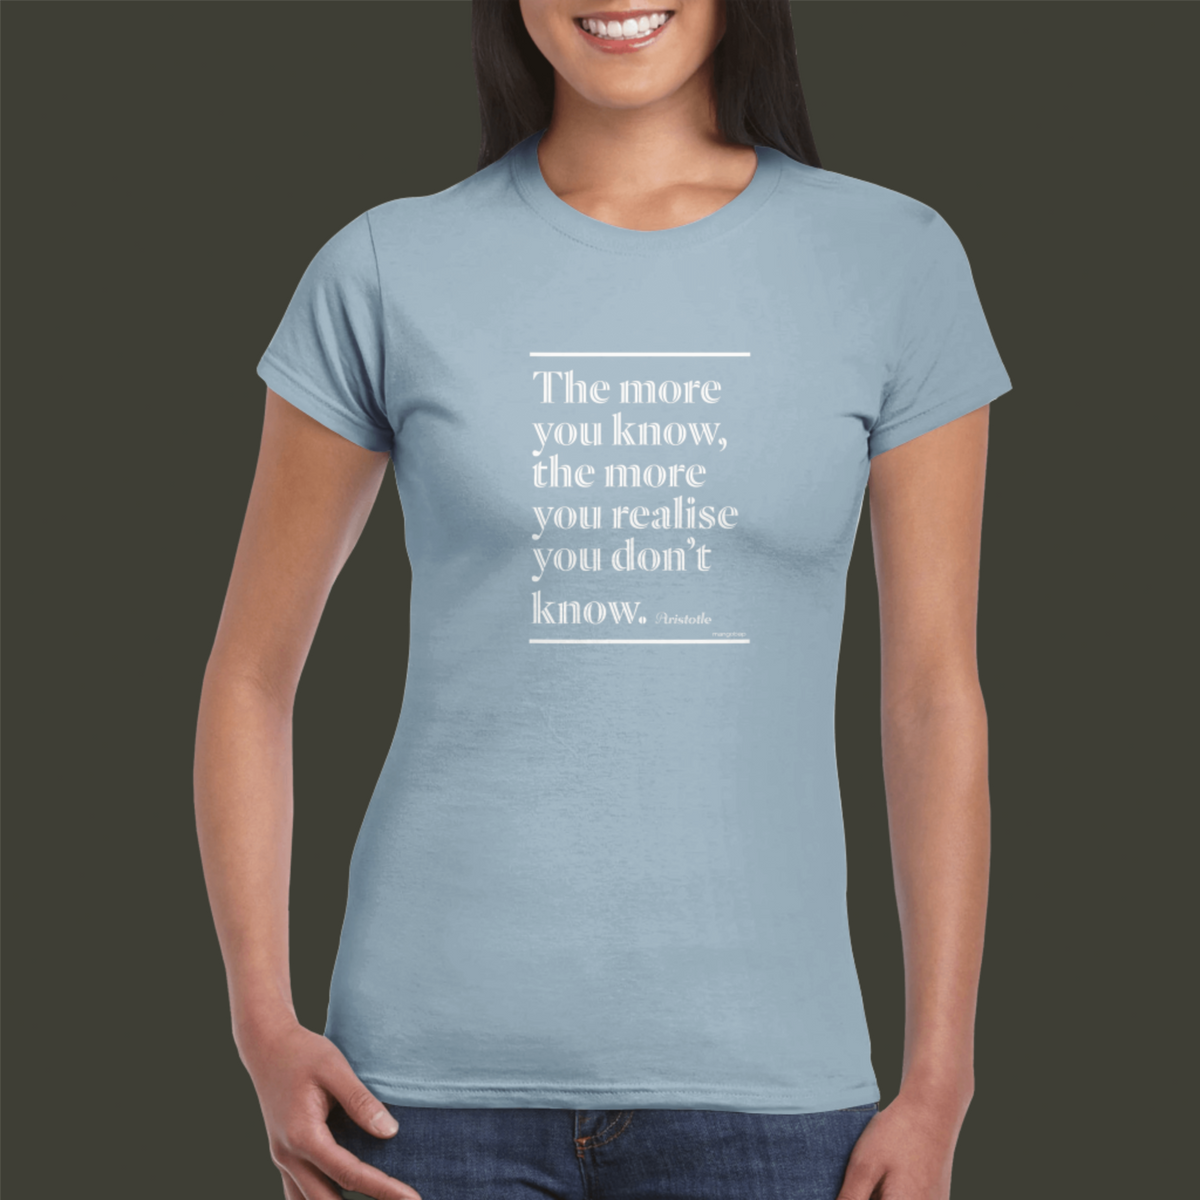 Womens The More You Know, The More You Realise You Don't Know light light blue t shirt - MangoBap